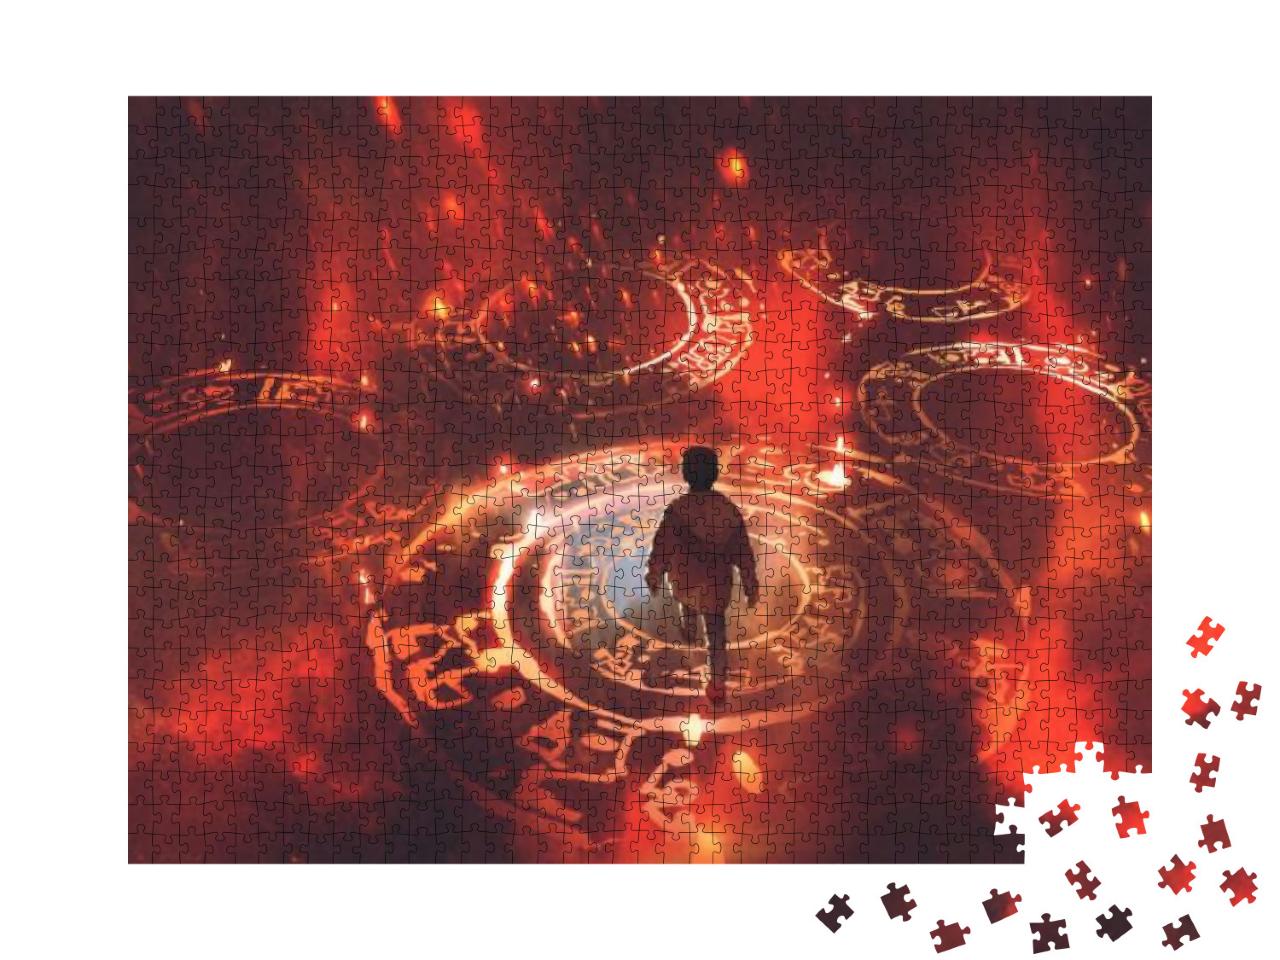 Boy Walking on Magic Circles or Sacred Symbols in the Air... Jigsaw Puzzle with 1000 pieces